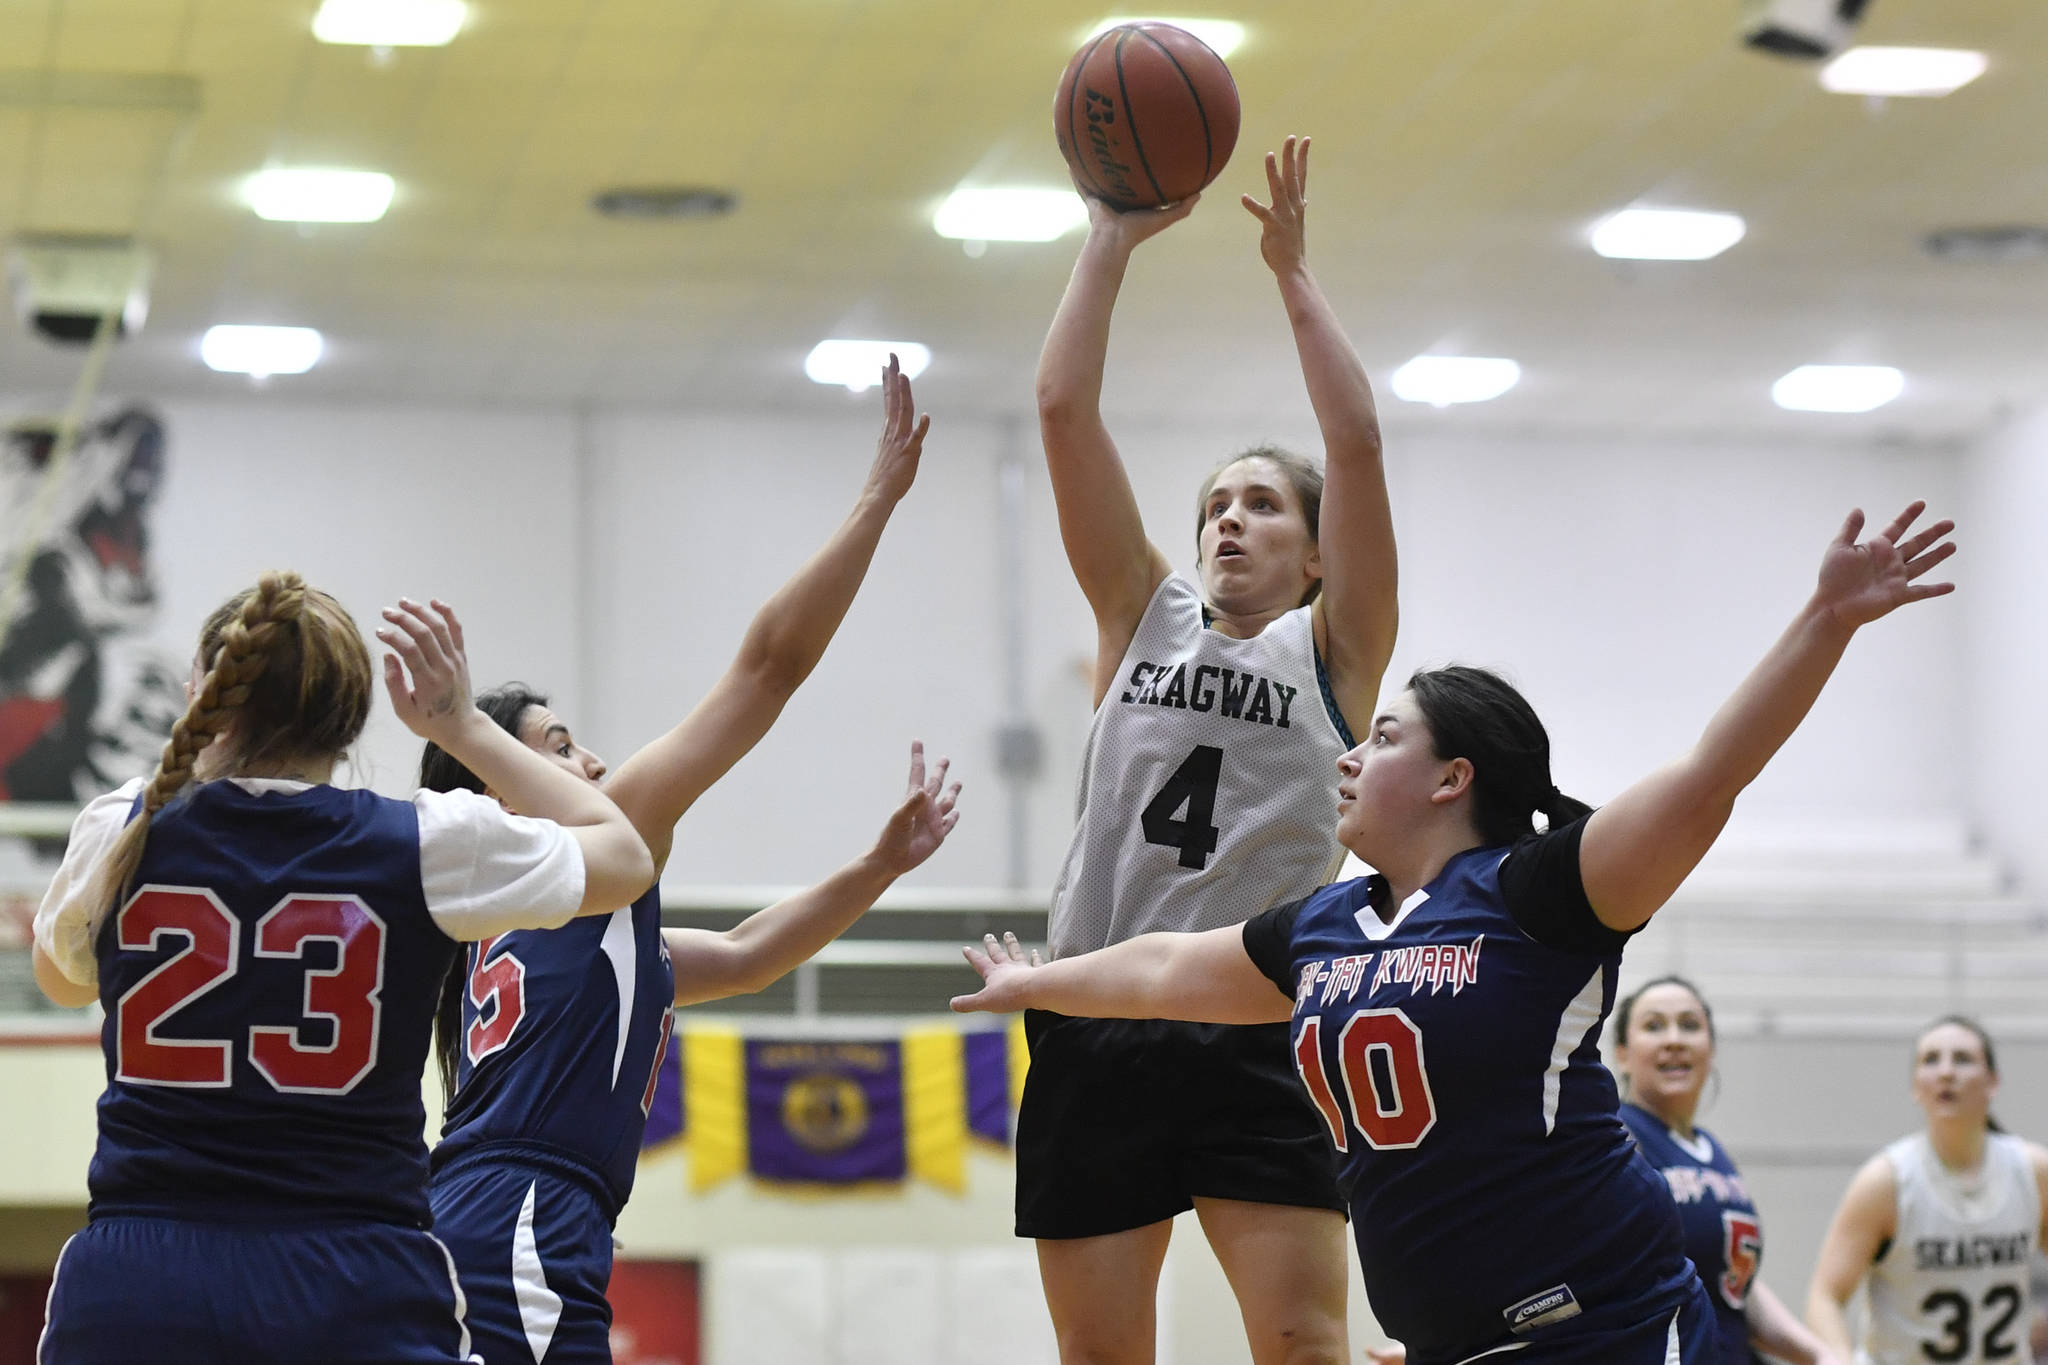 Skagway’s Kailyn Jerod shoots over Yakutat’s Cheyenne Ekis, left, Lorena Williams, center, and Nadine Fraker during the women’s bracket game at the Gold Medal Basketball Tournament on Thursday, March 21, 2019. (Michael Penn | Juneau Empire)